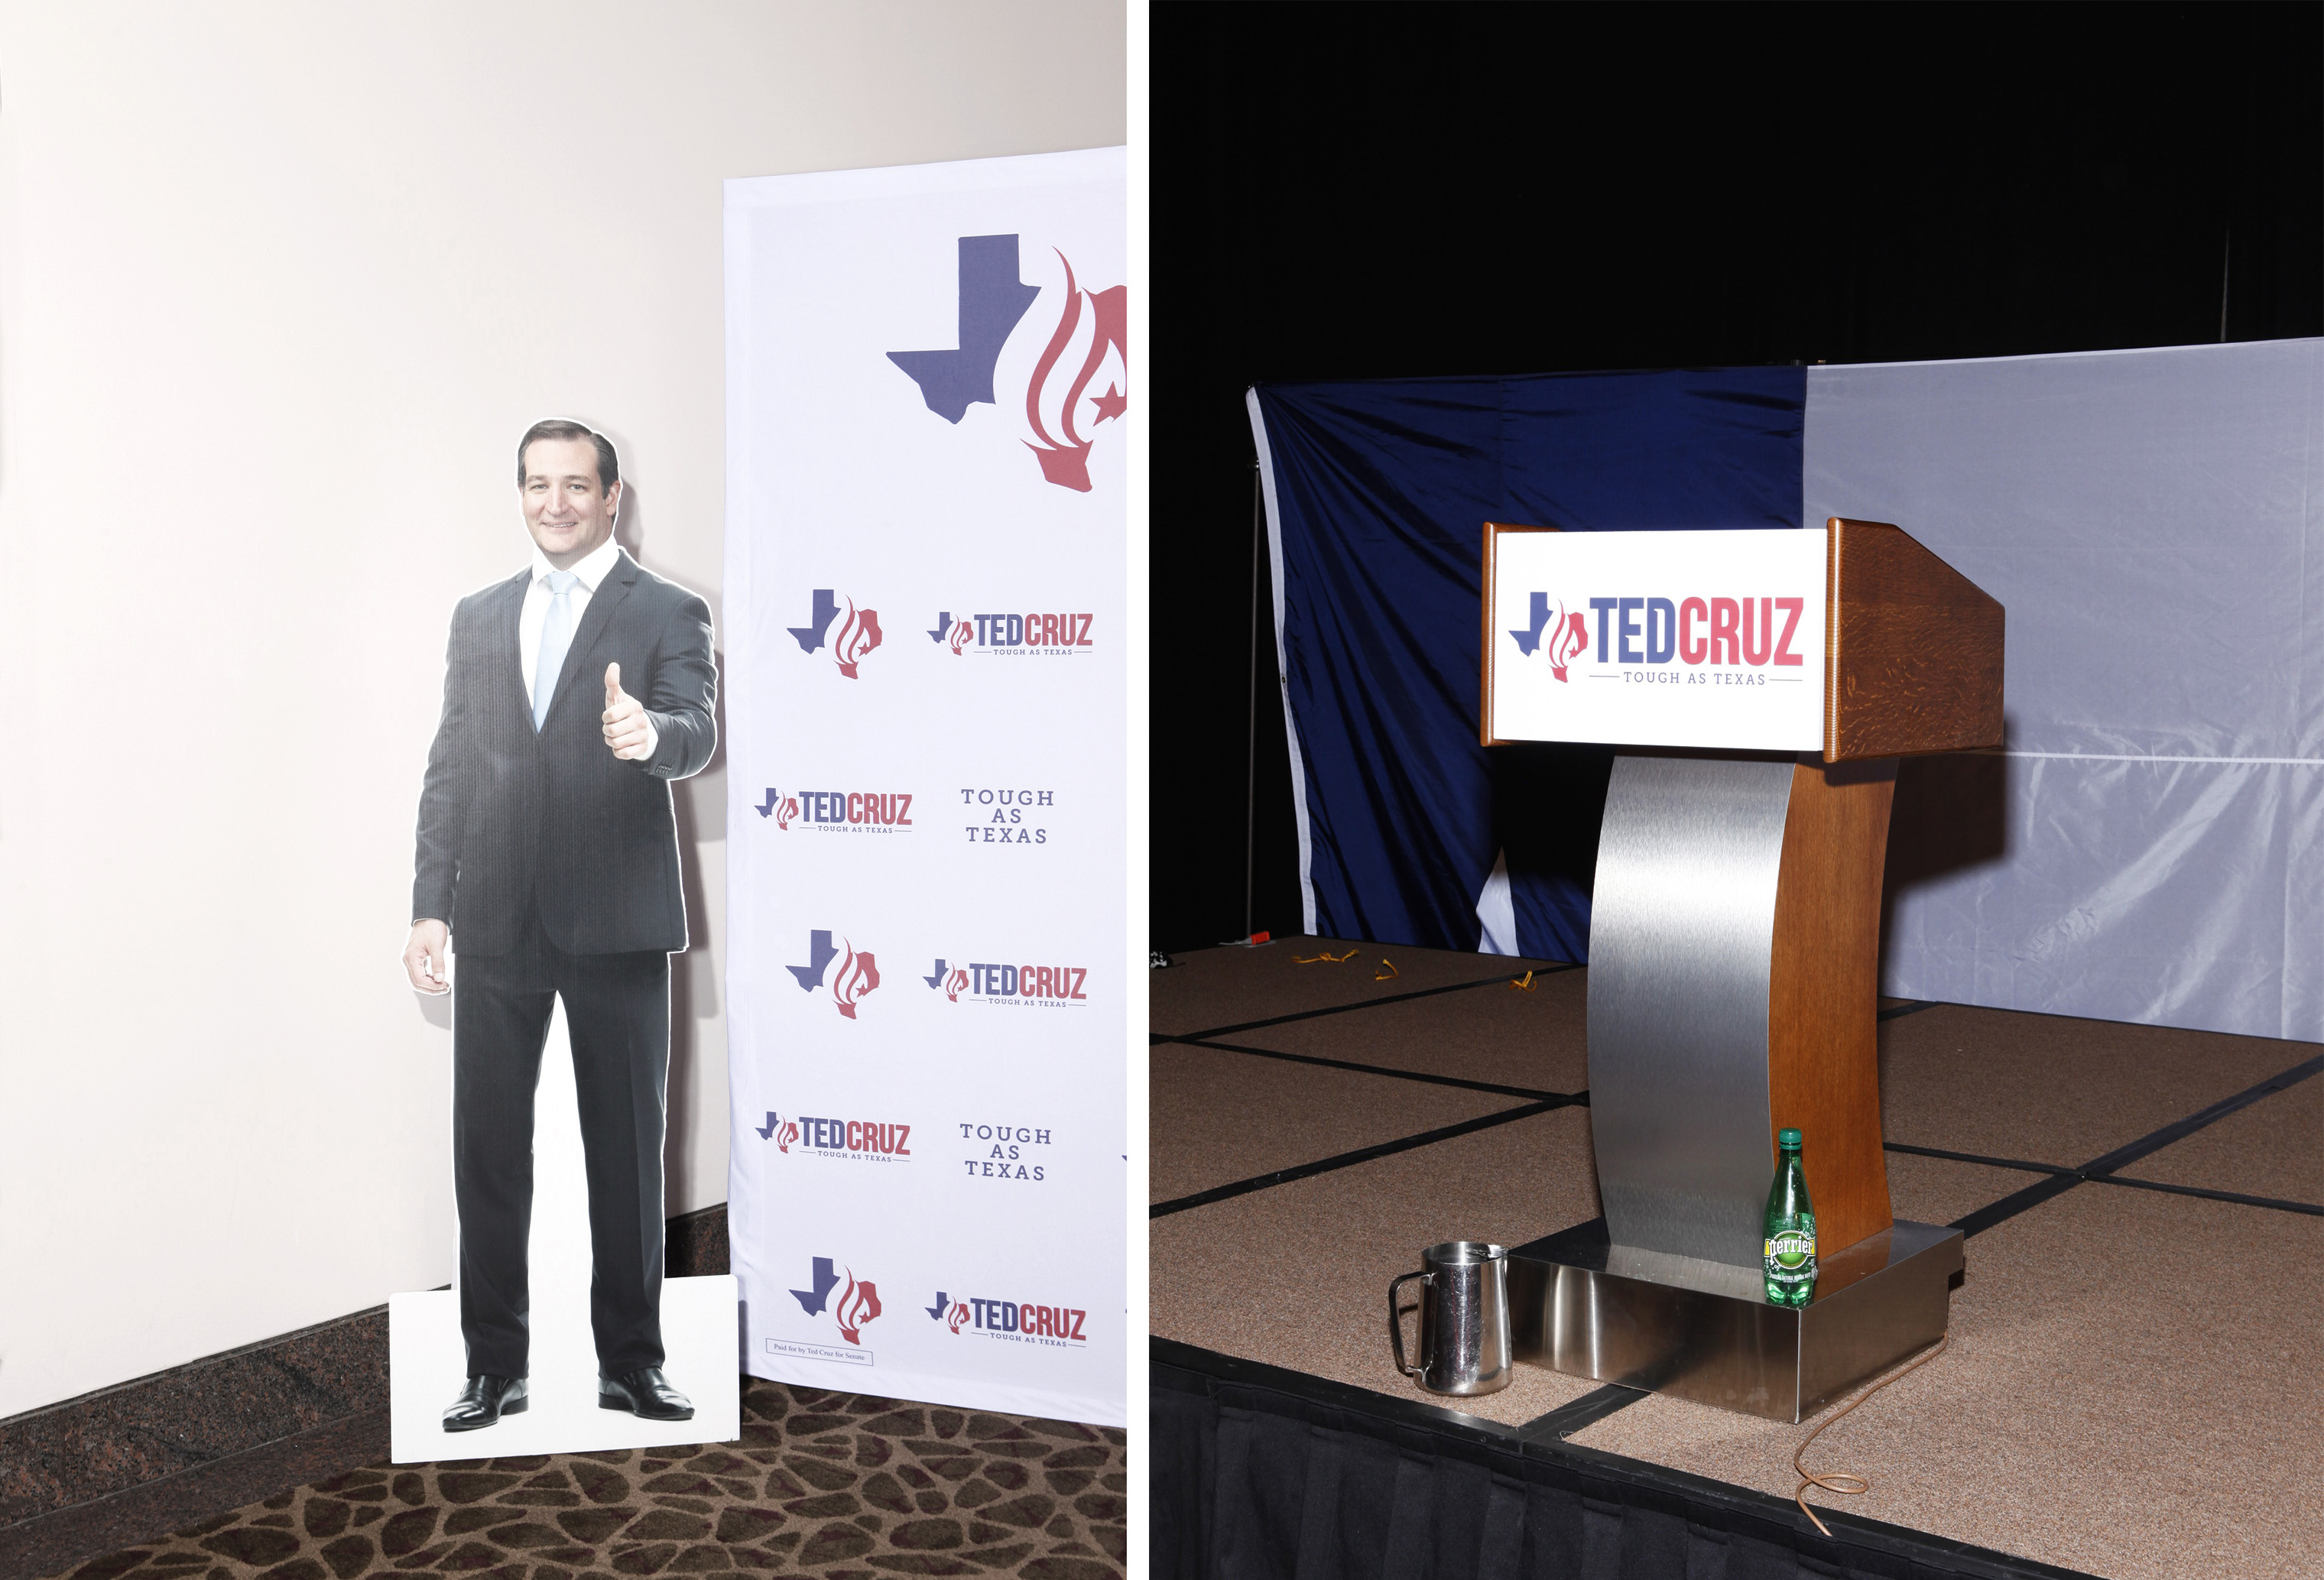 Scenes from the setup for the Election Night party for Sen. Ted Cruz in Houston. (Brent Humphreys for TIME)